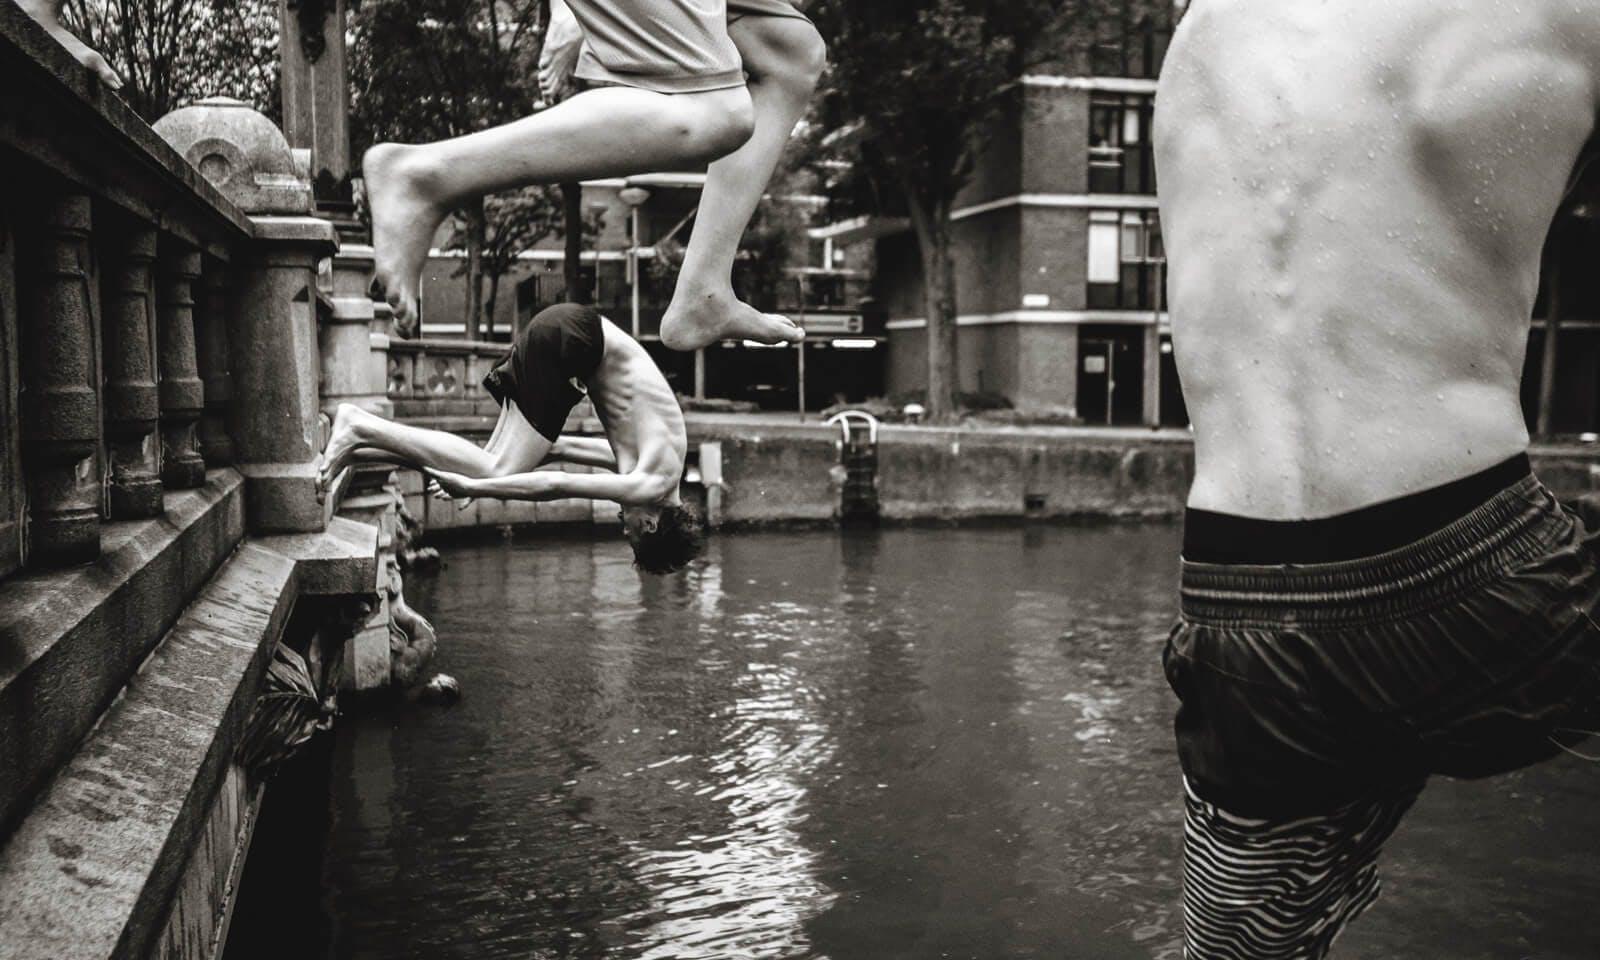 Boys jumping in city canal in black and white 